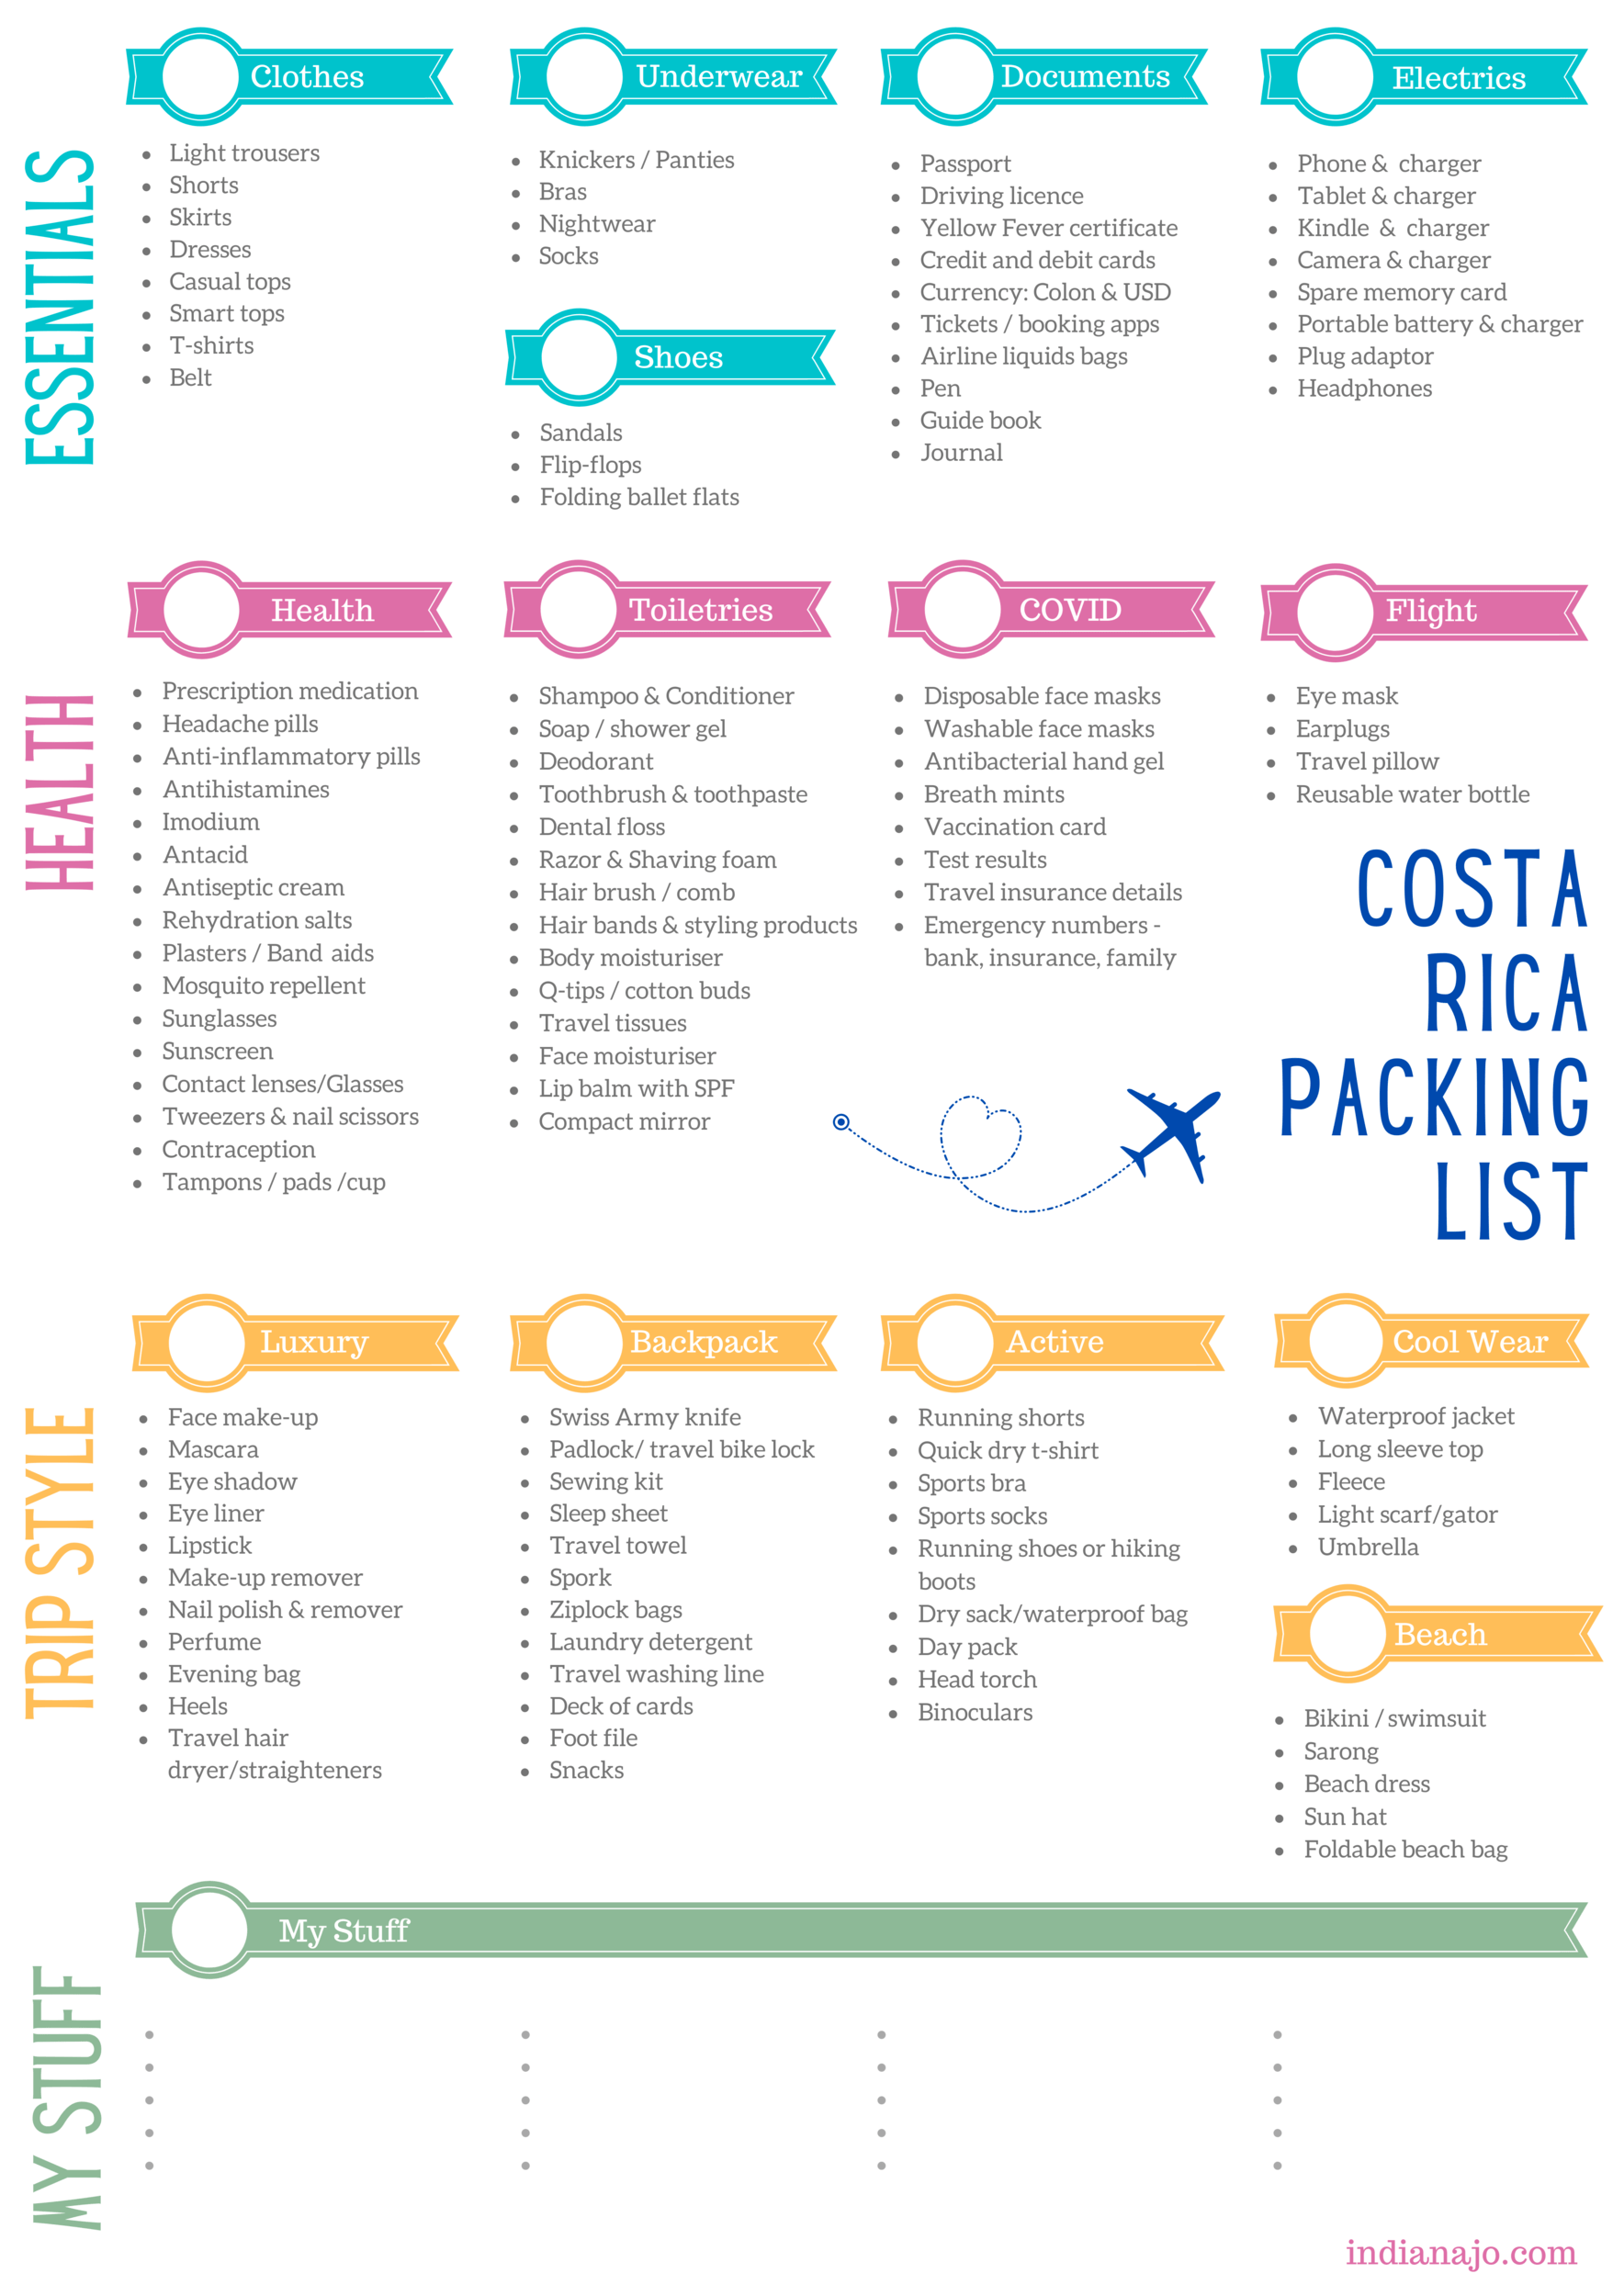 Costa Rica packing list to print at home